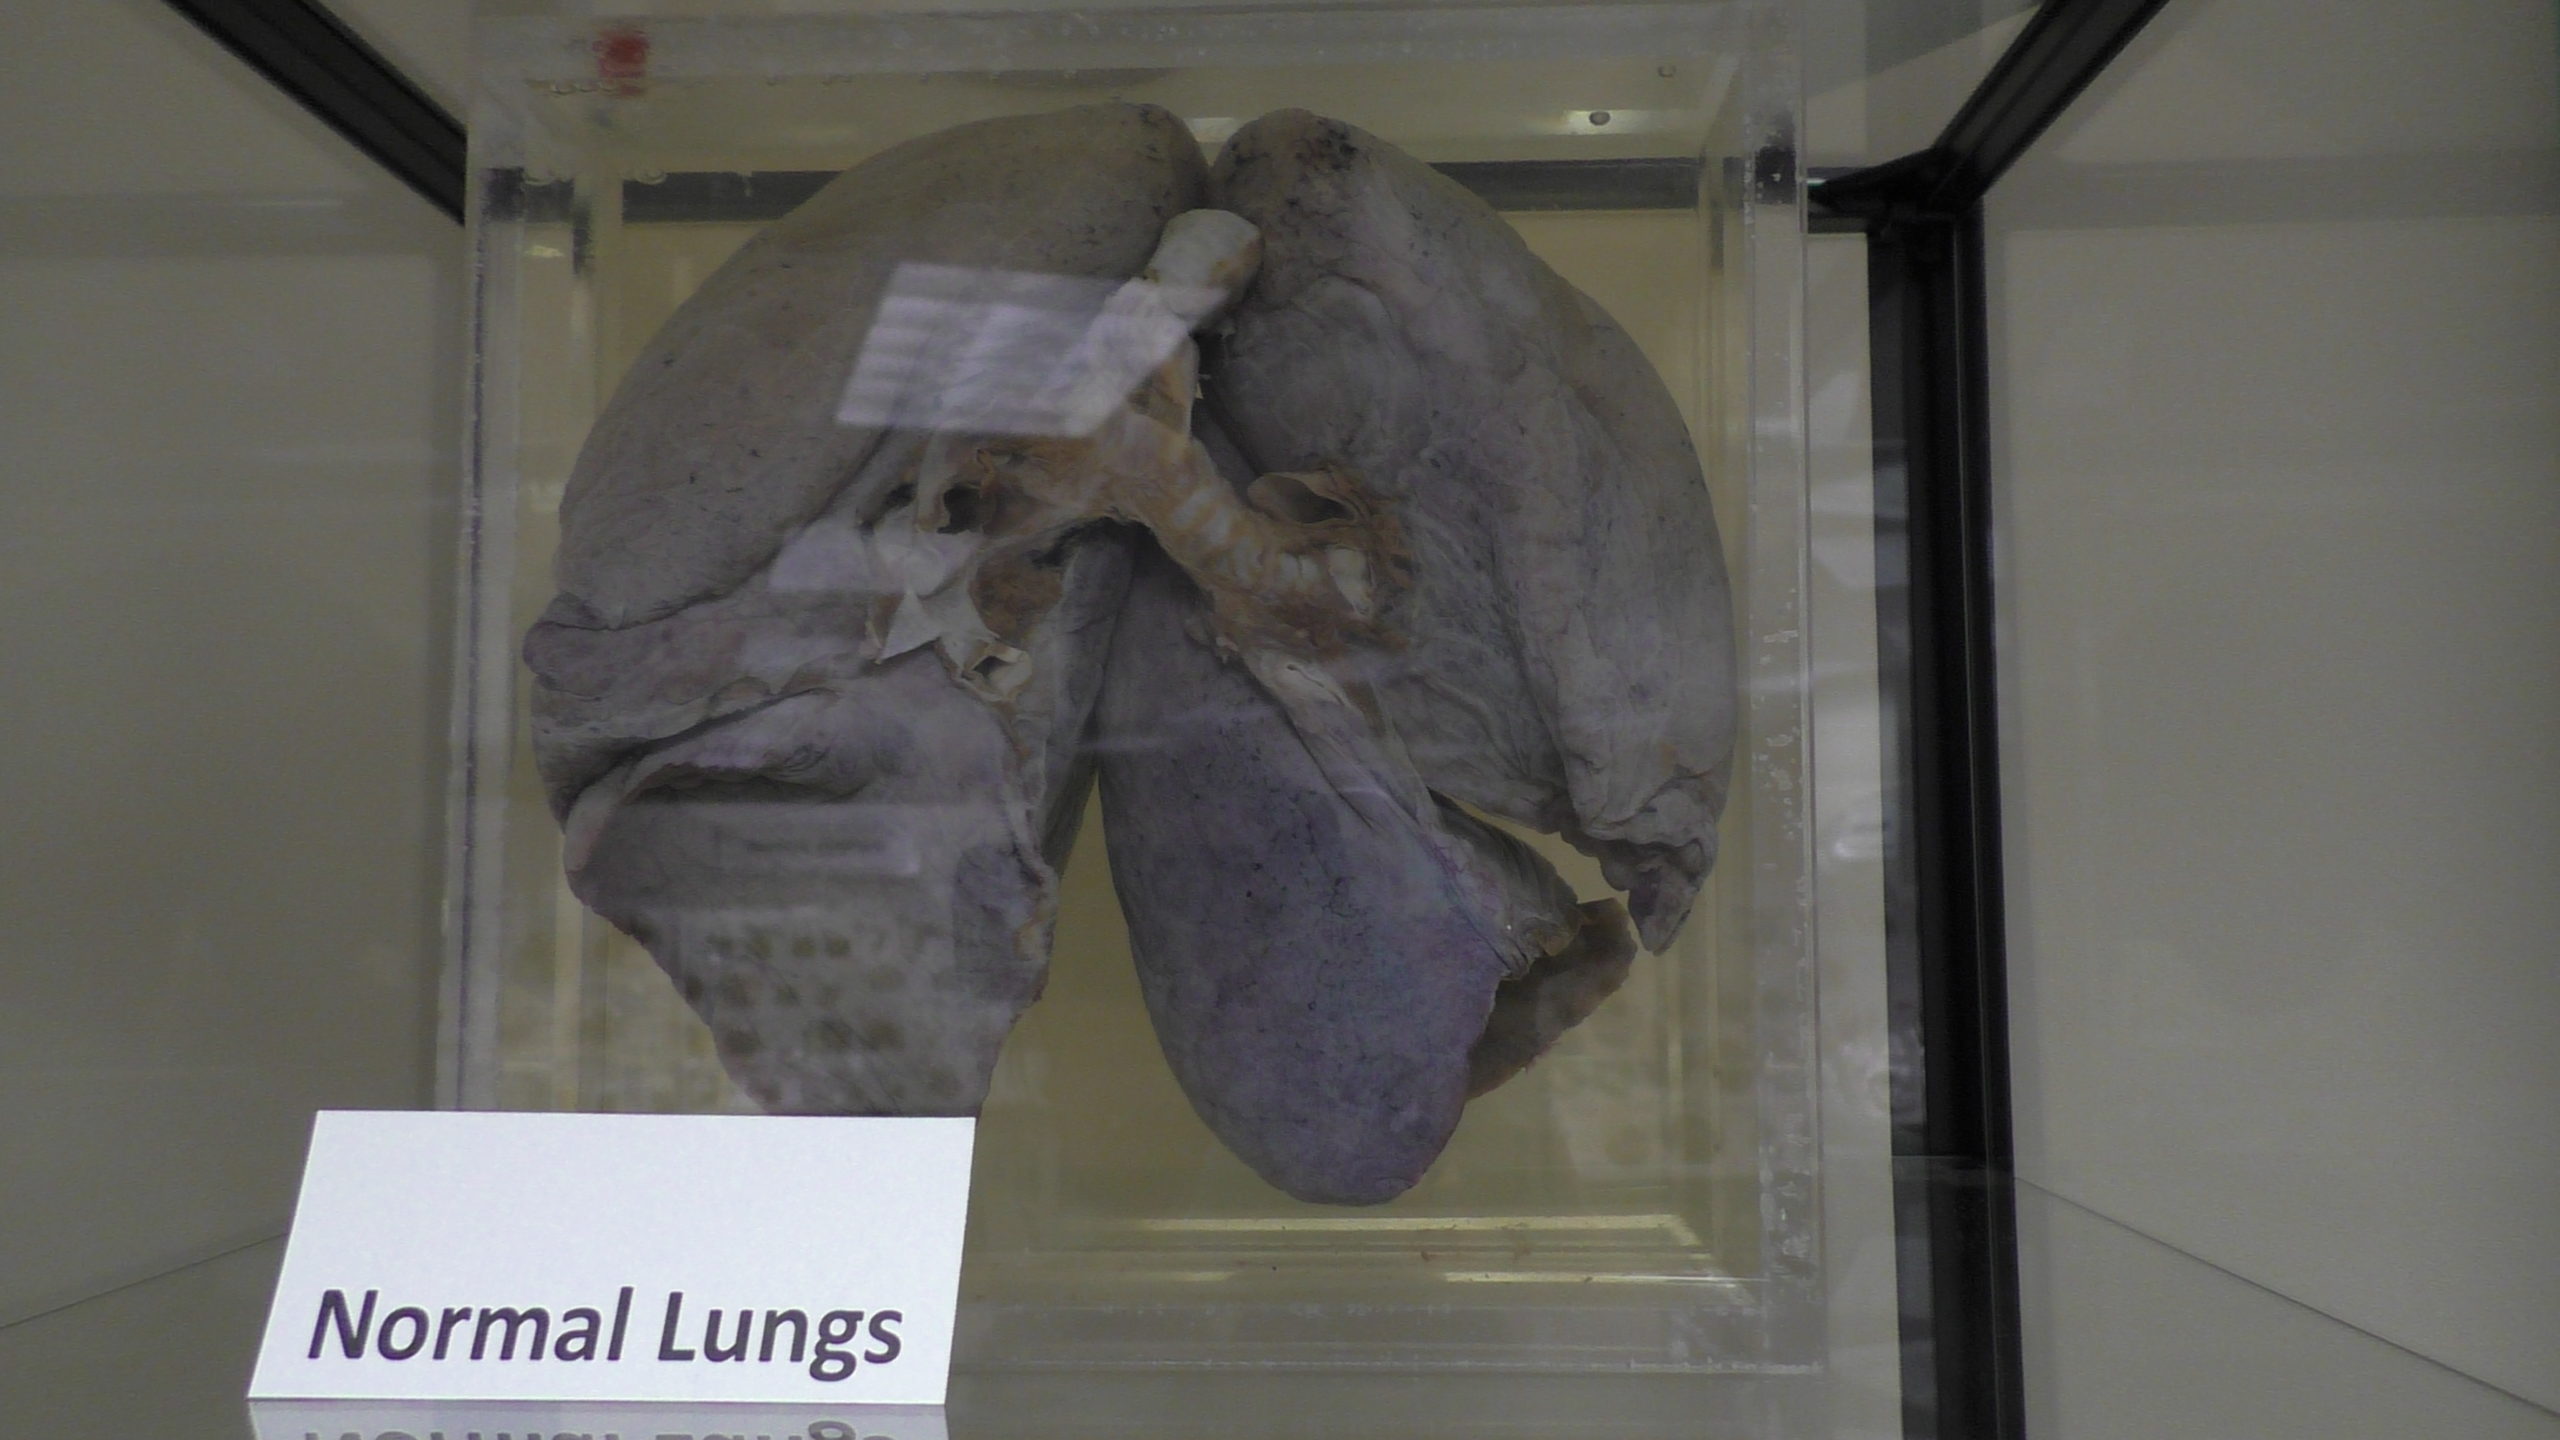 normal lungs from healthy woman with visible trachea, bronchi, and lung lobes.